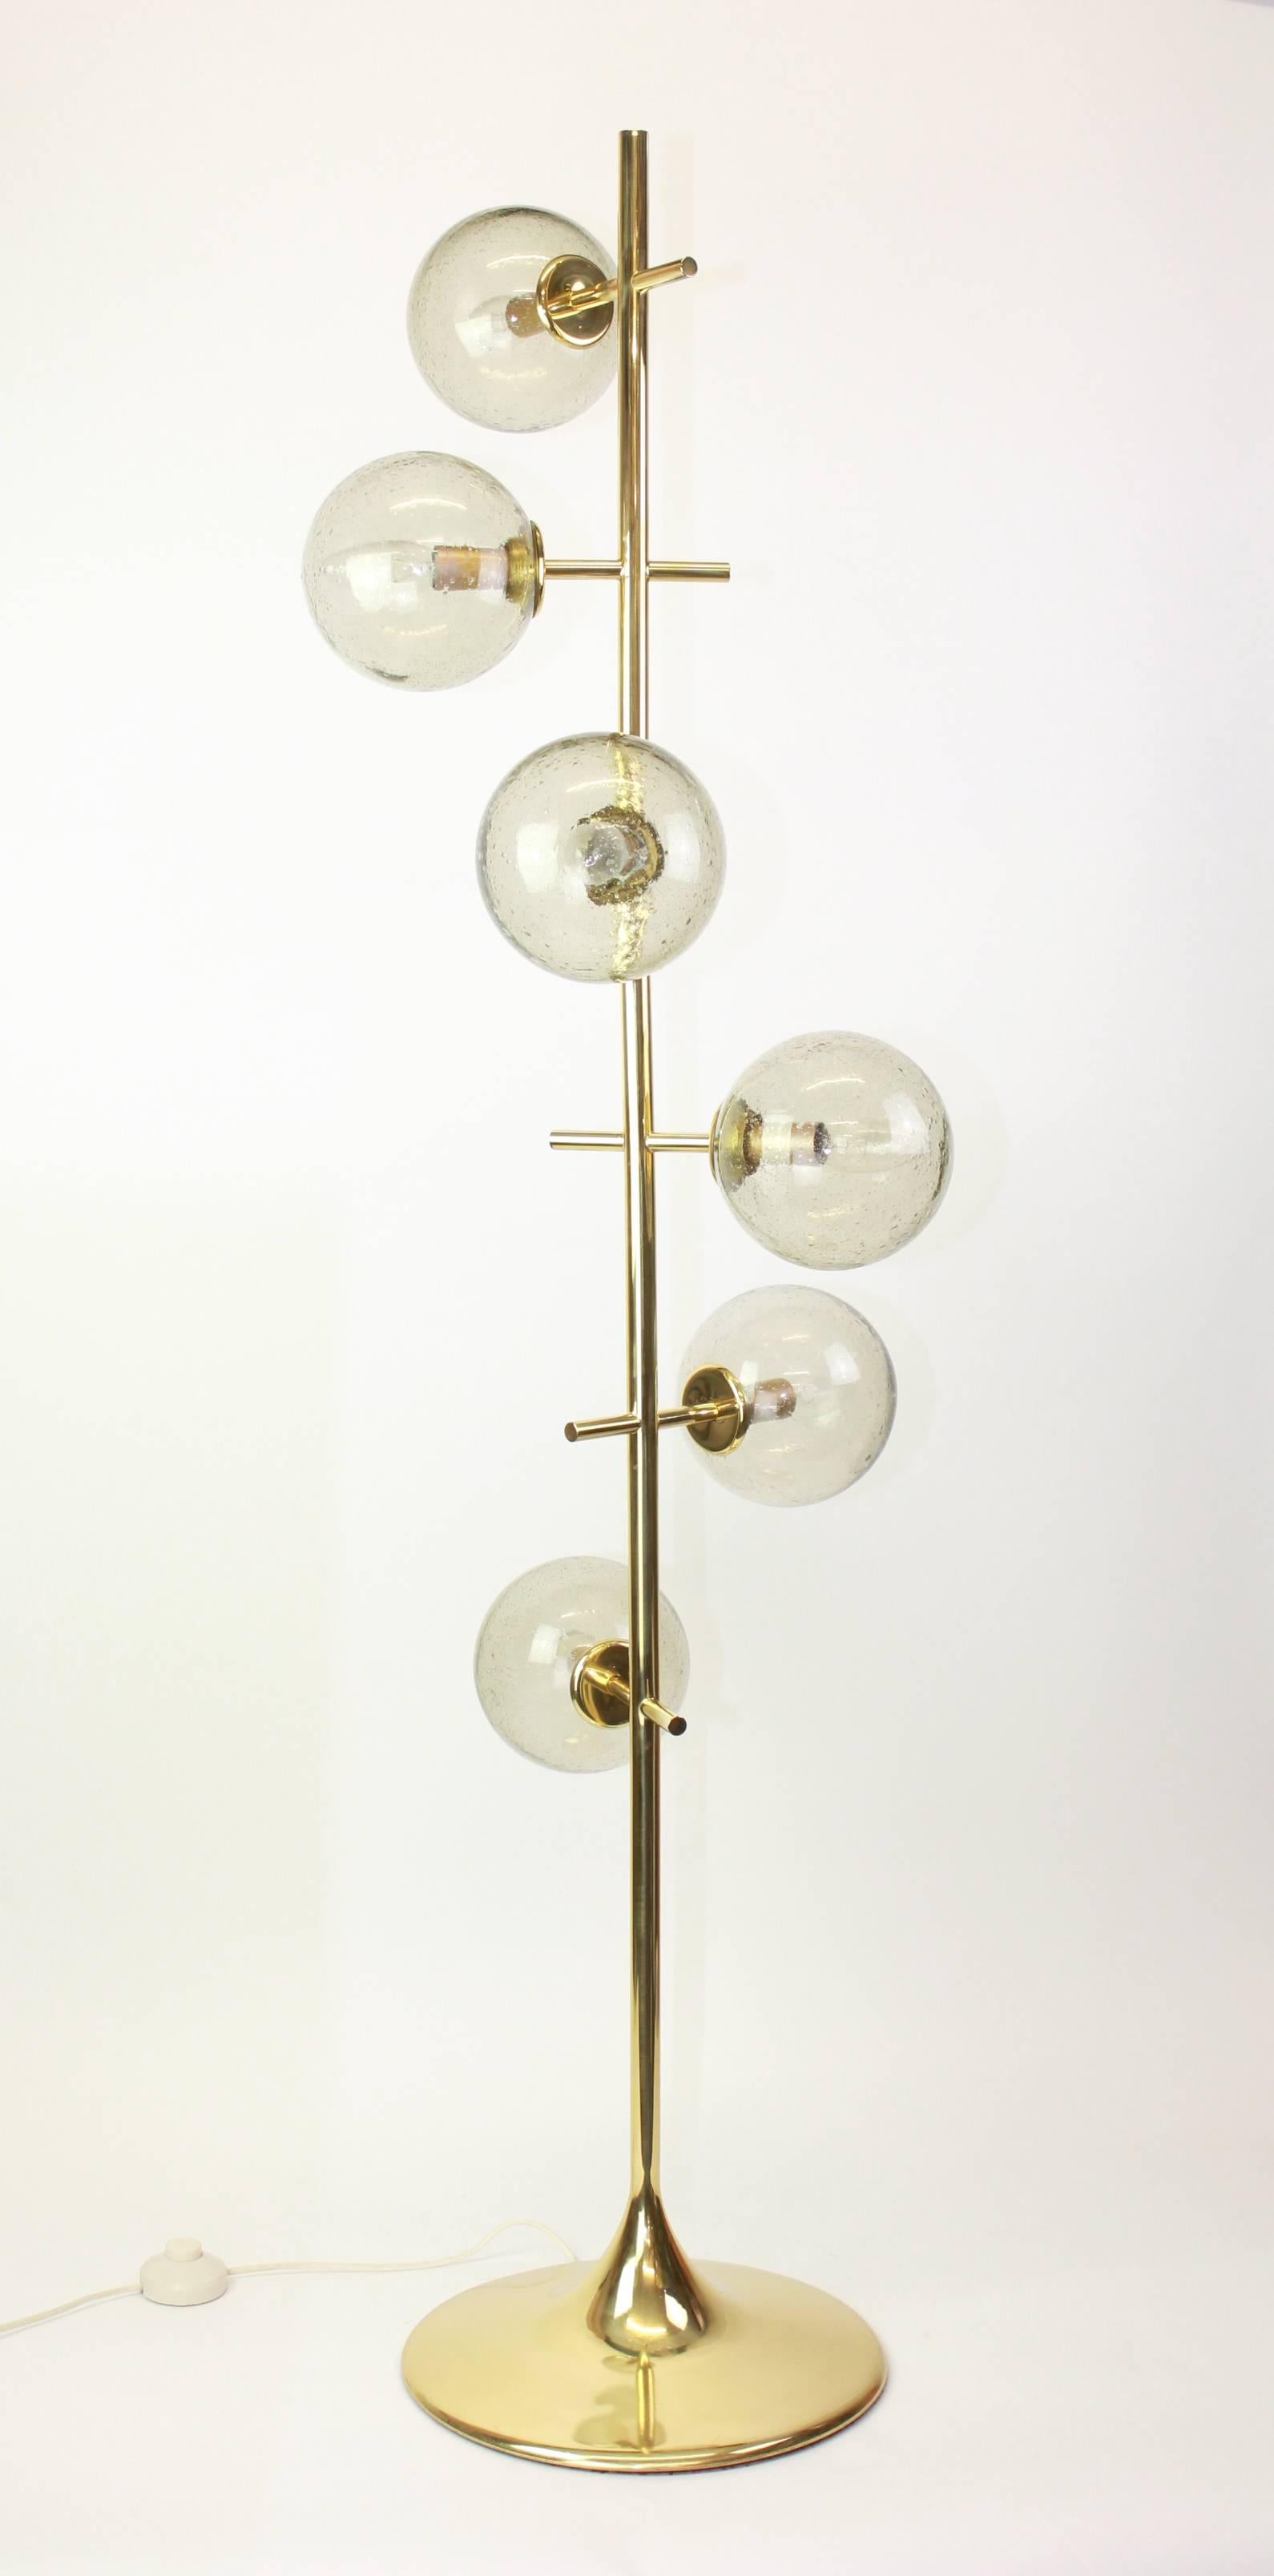 Atomic floor lamp with six-glass globes was designed by the Swiss artist and designer Max Bill for Temde Leuchten. The globes are handblown and fitted with a screwing device.

High quality and in very good condition with a tiny dent on the brass